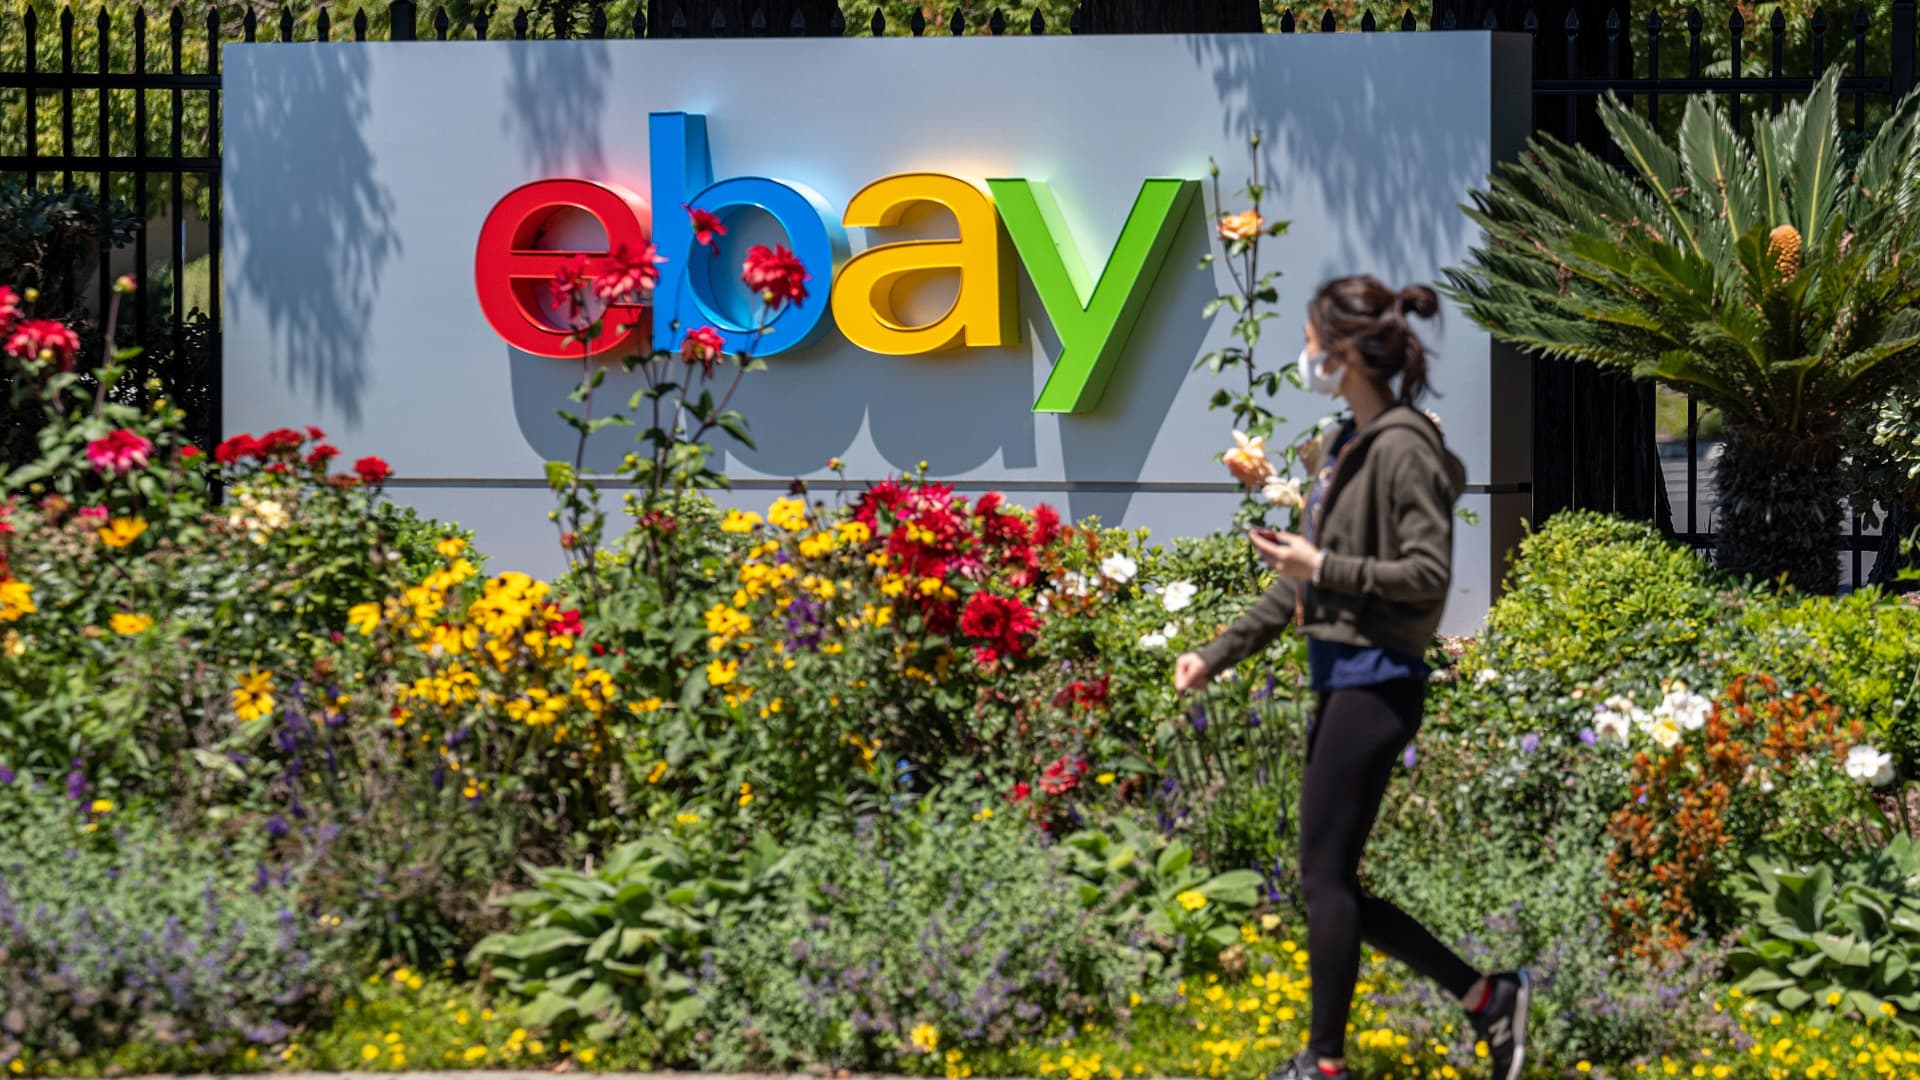 Ebay plans to lay off 500 employees, about 4% of its workforce